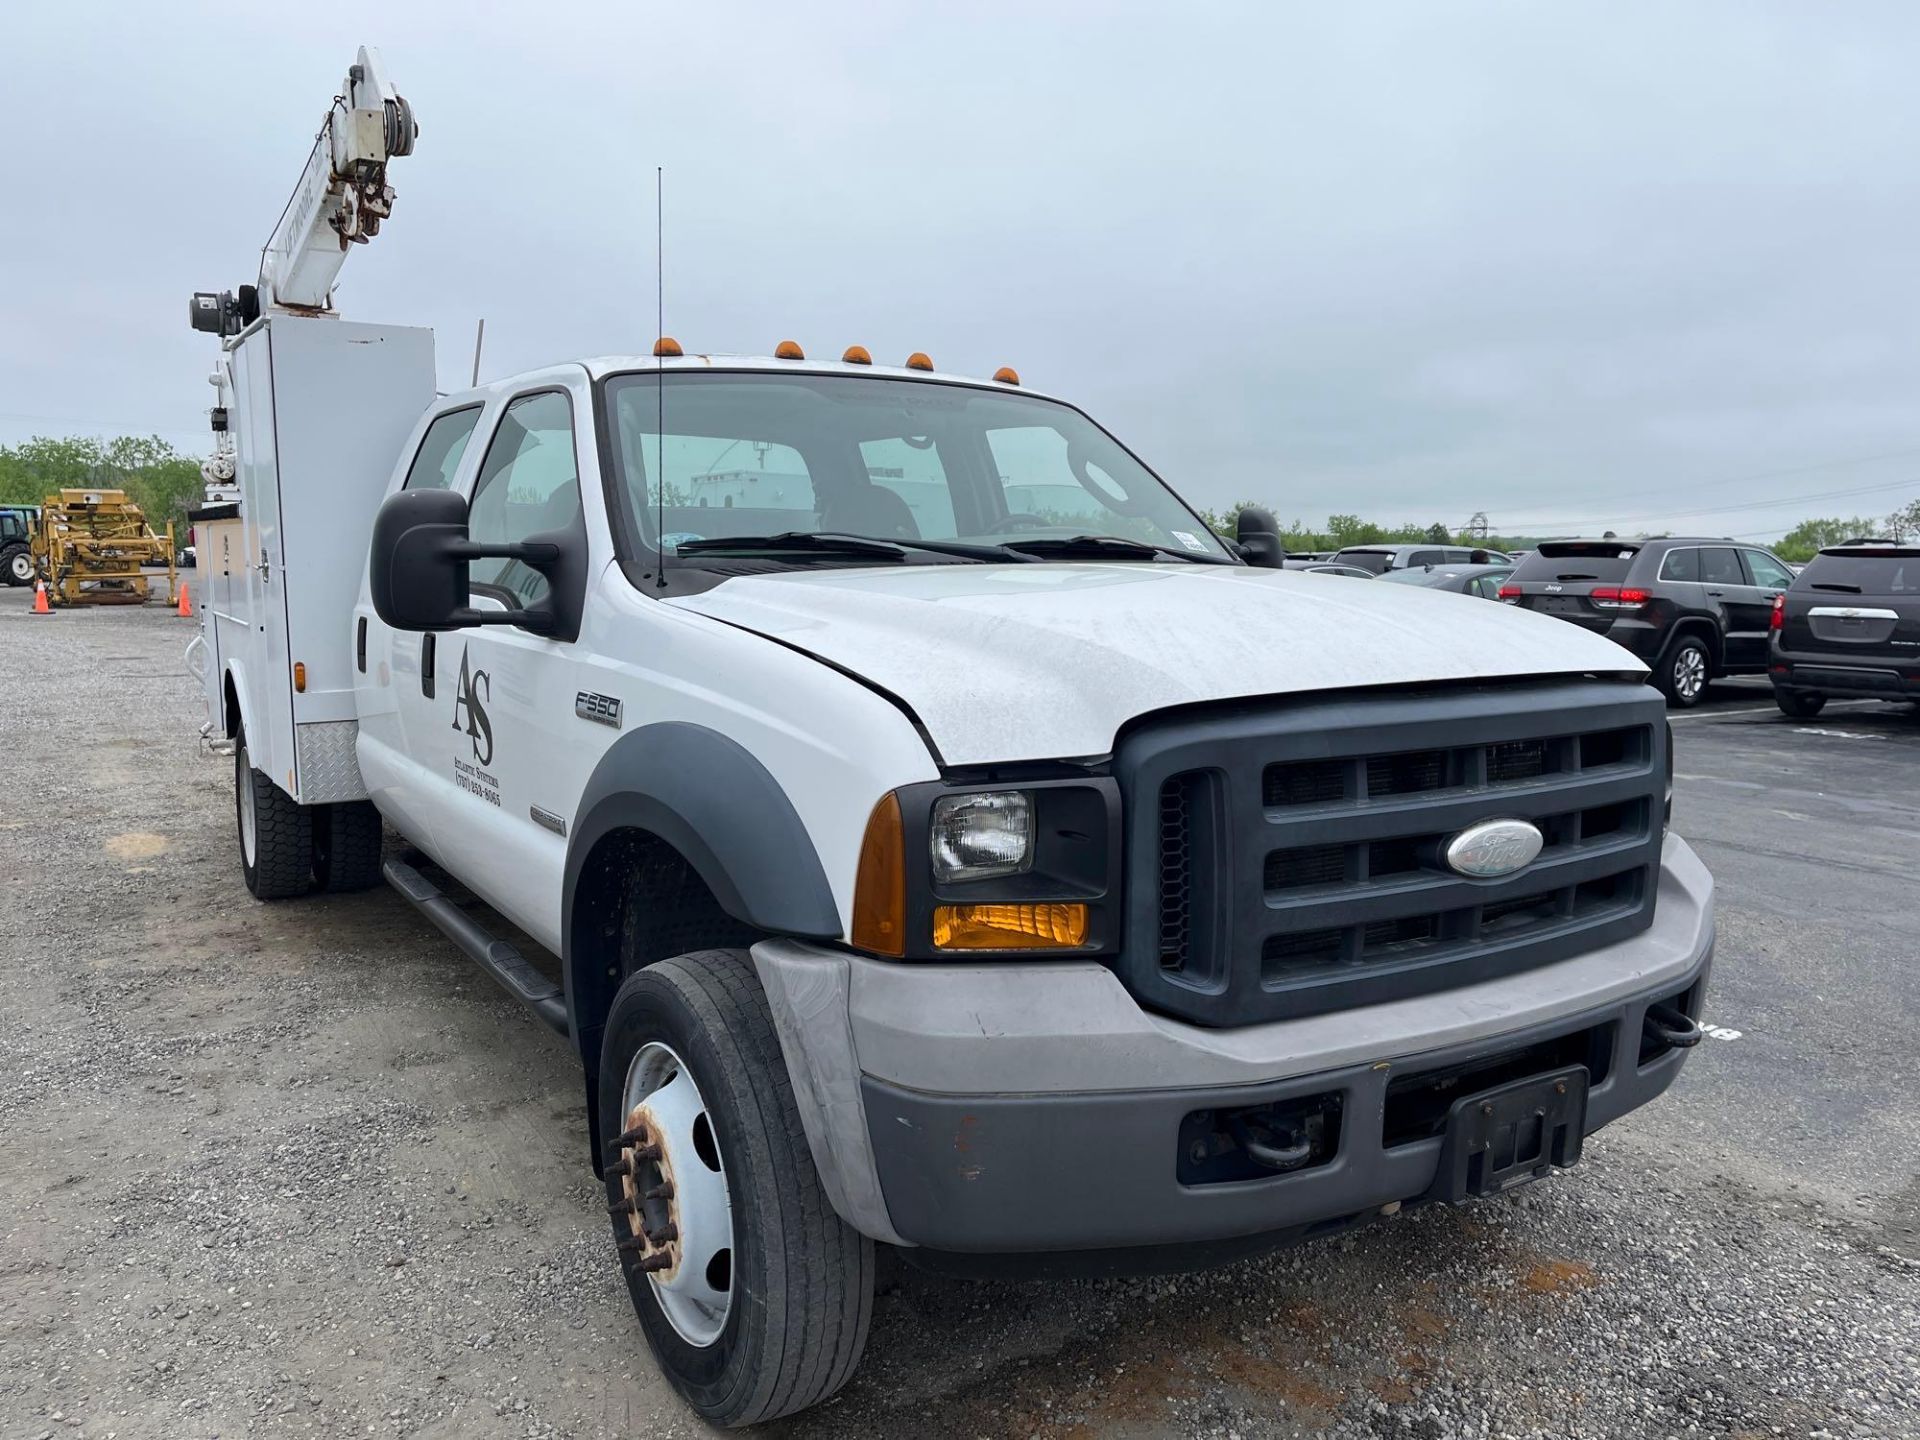 2006 Ford F550 Crane Service Truck - Image 4 of 21